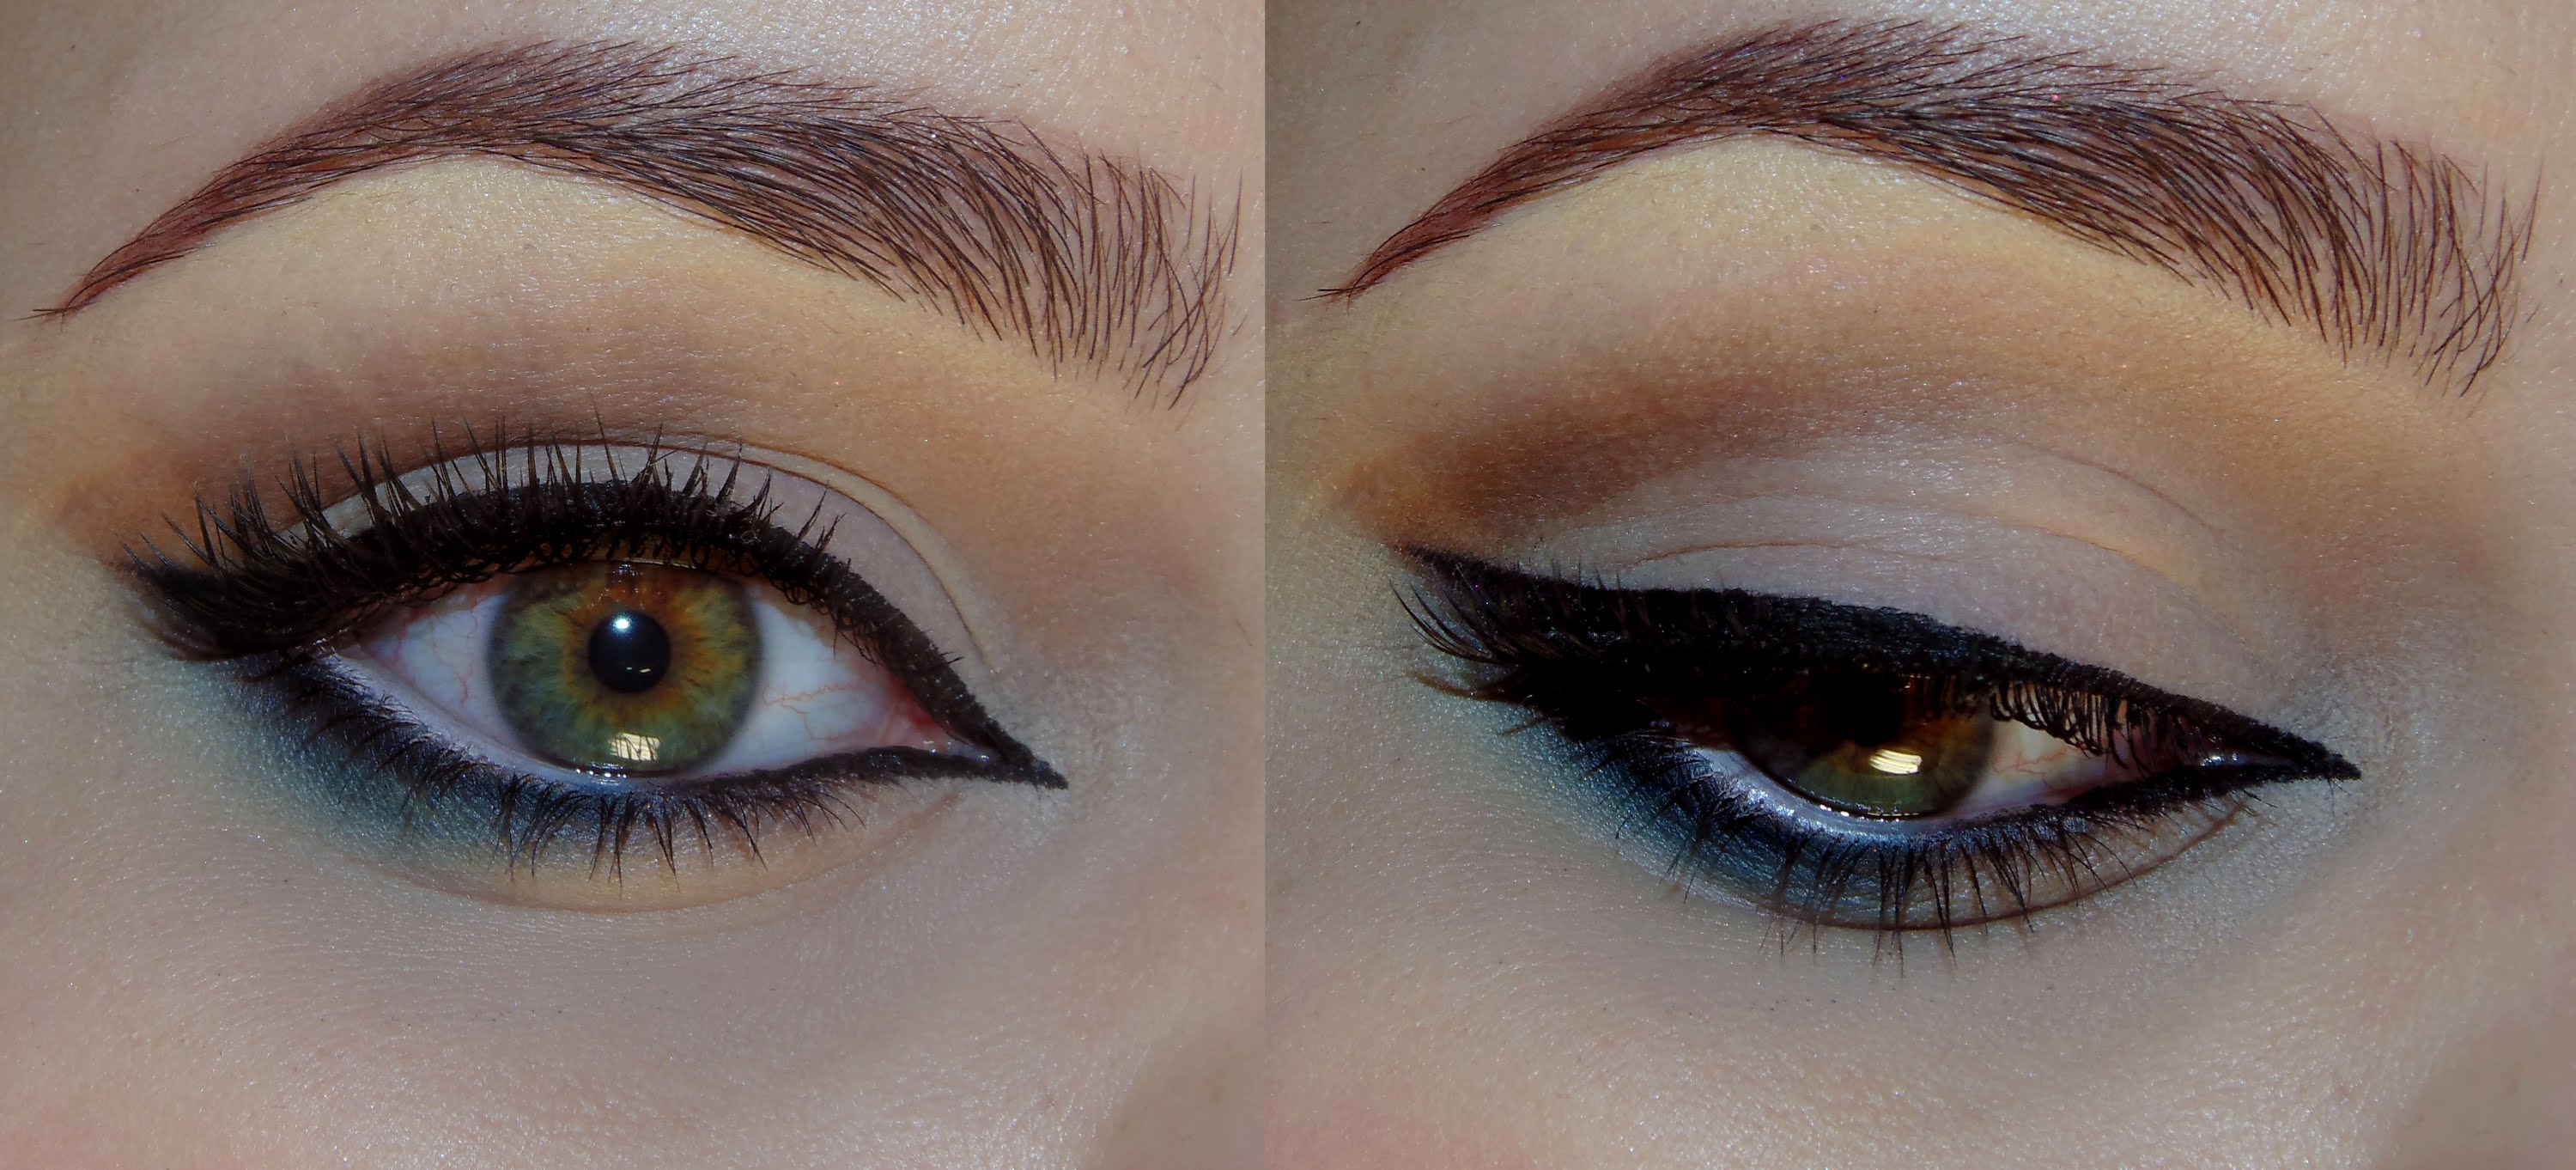 Revamped cat eye - 10 Eyeliner Styles for Beginners - Step By Step Tutorial with Images